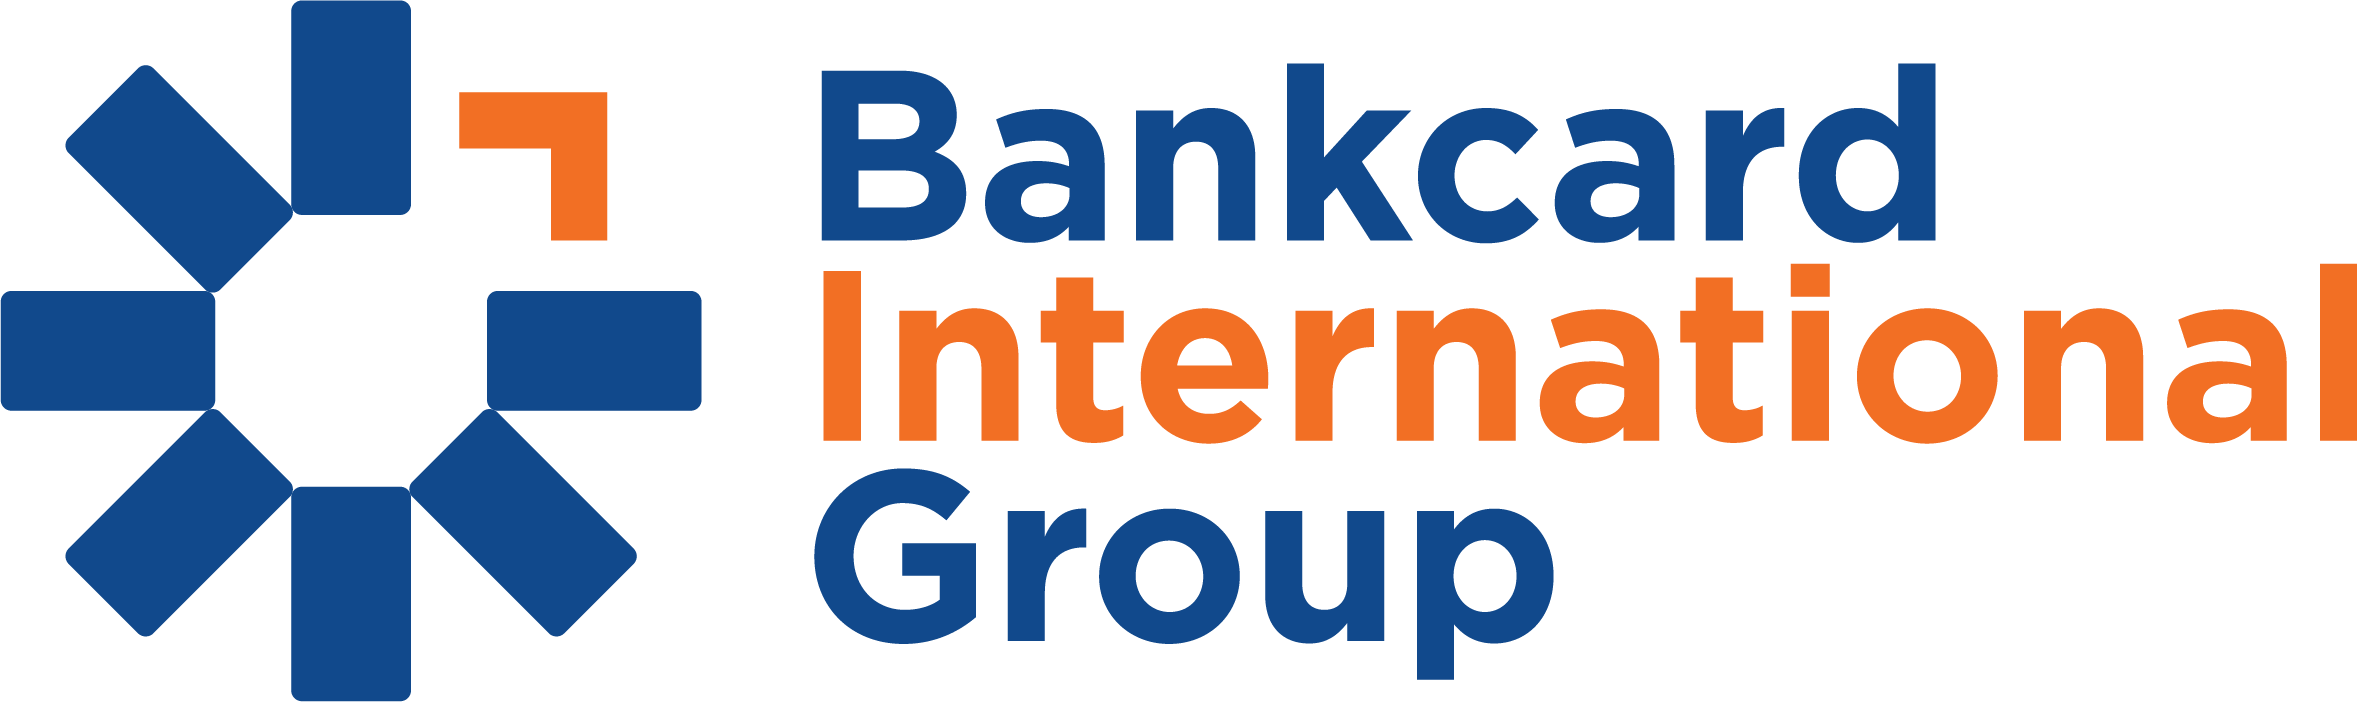 Bankcard International Group - High Risk Merchant Services - Done Right.